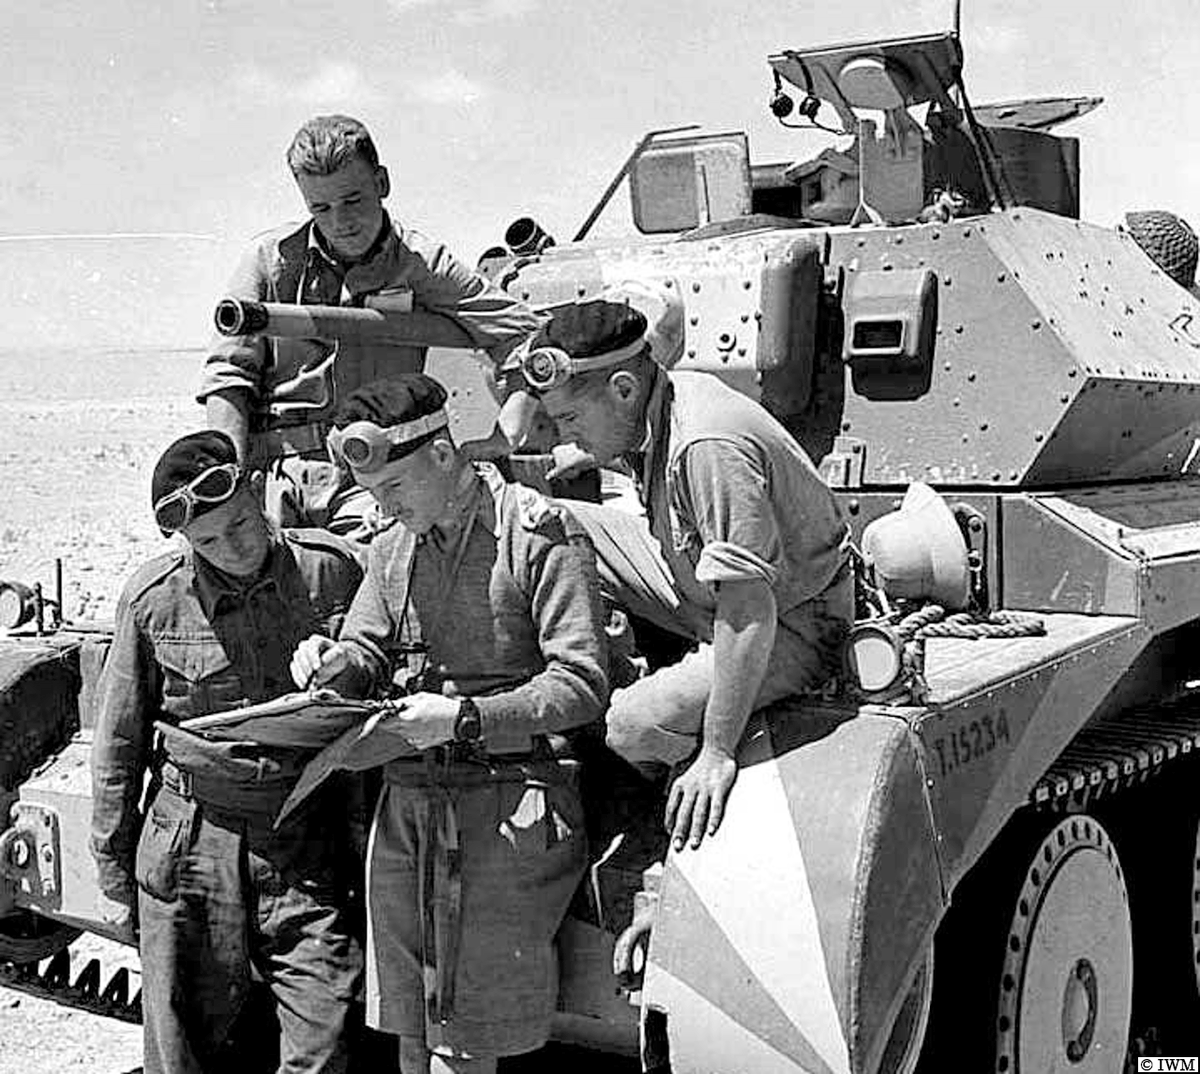 #OTD in 1941, North Africa. The crew from a Cruiser tank IV studying a map. #WW2 #HISTORY